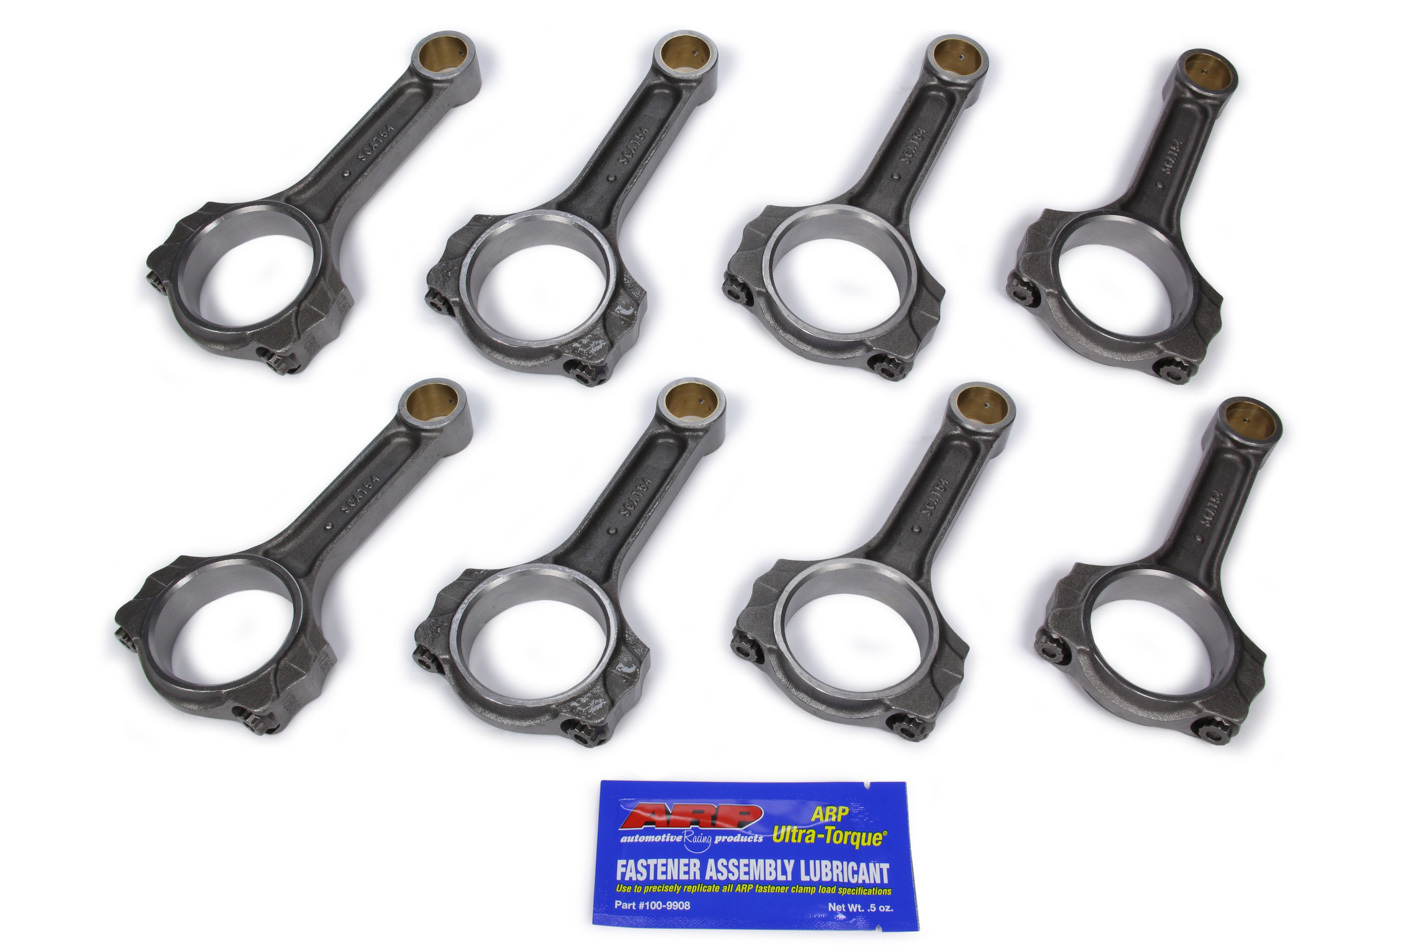 Scat 2-ICR5400-7/16 - Connecting Rod, Pro Series, I Beam, 5.400 in Long, Bushed, 7/16 in Cap Screws, ARP8740, Forged Steel, Small Block Ford, Set of 8